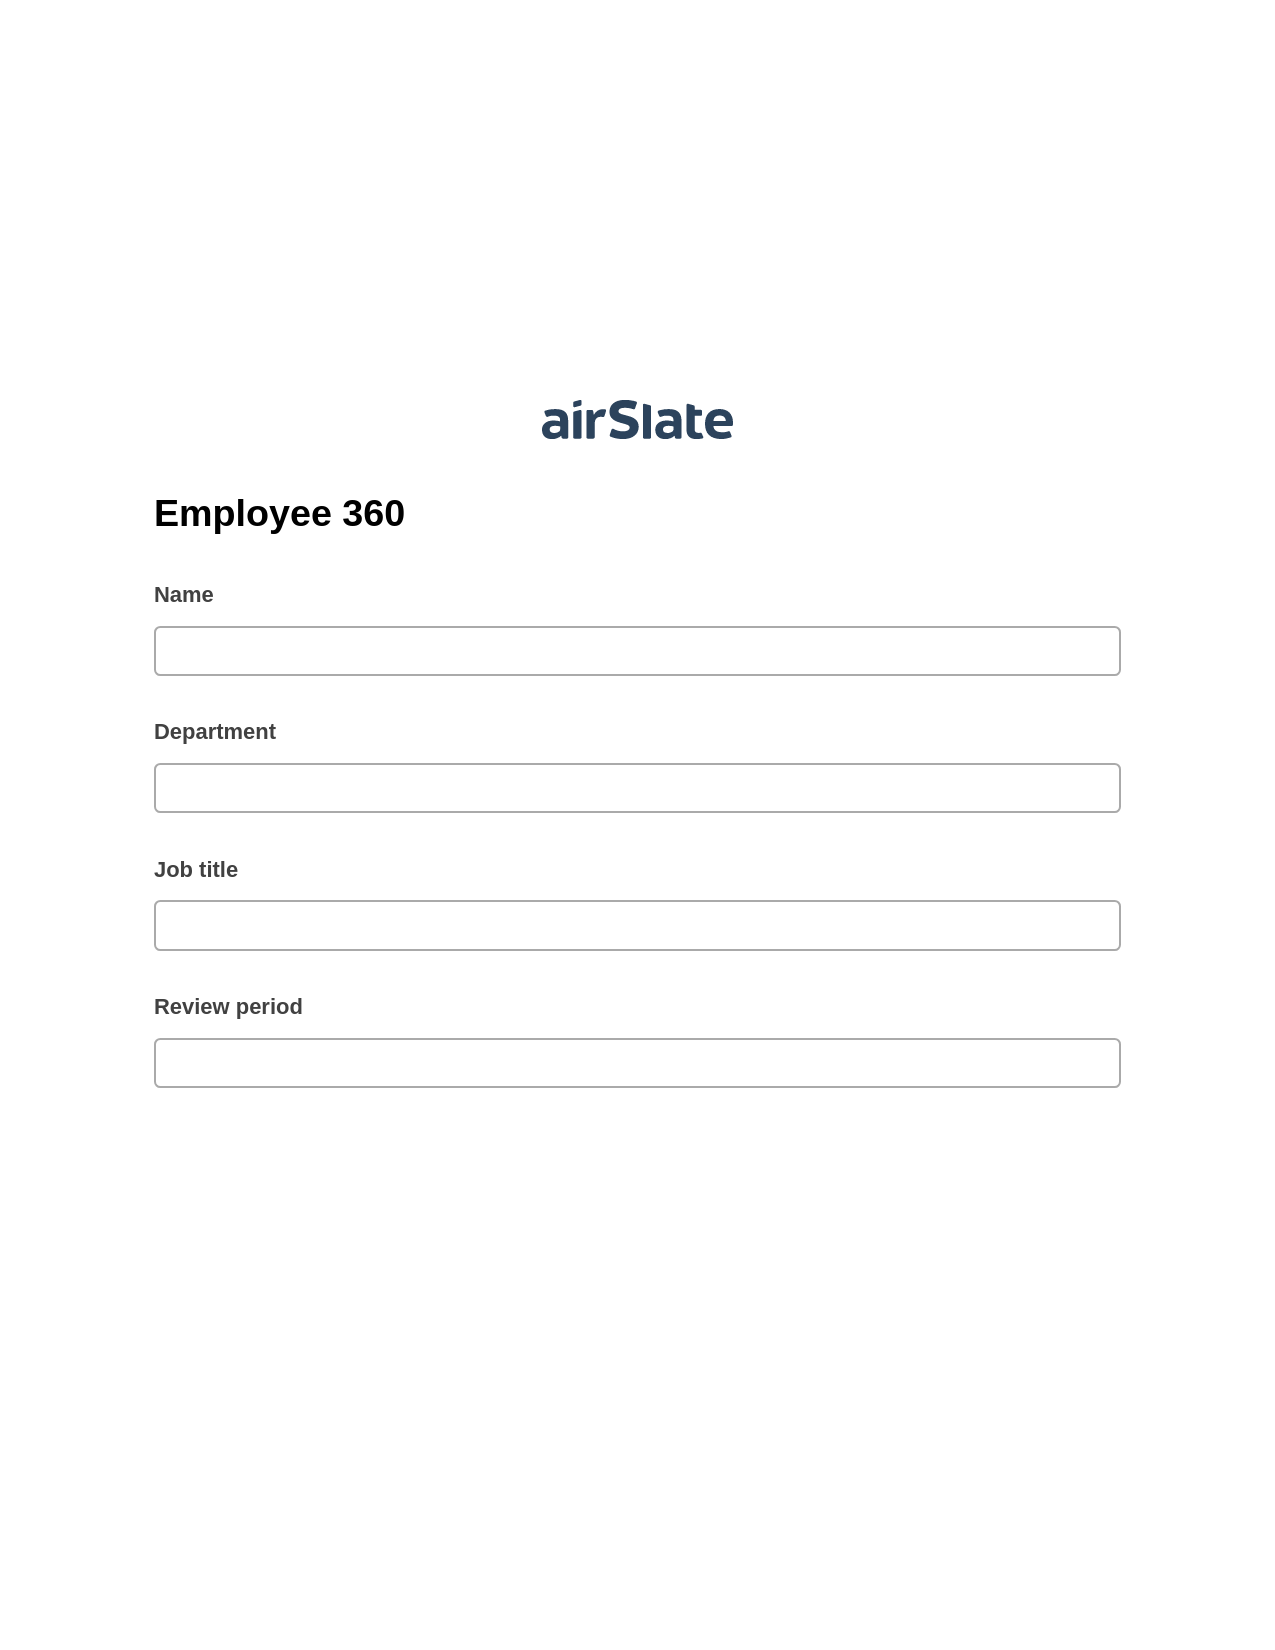 Employee 360 Pre-fill from MS Dynamics 365 Records, Invoke Salesforce Process Bot, Archive to Google Drive Bot